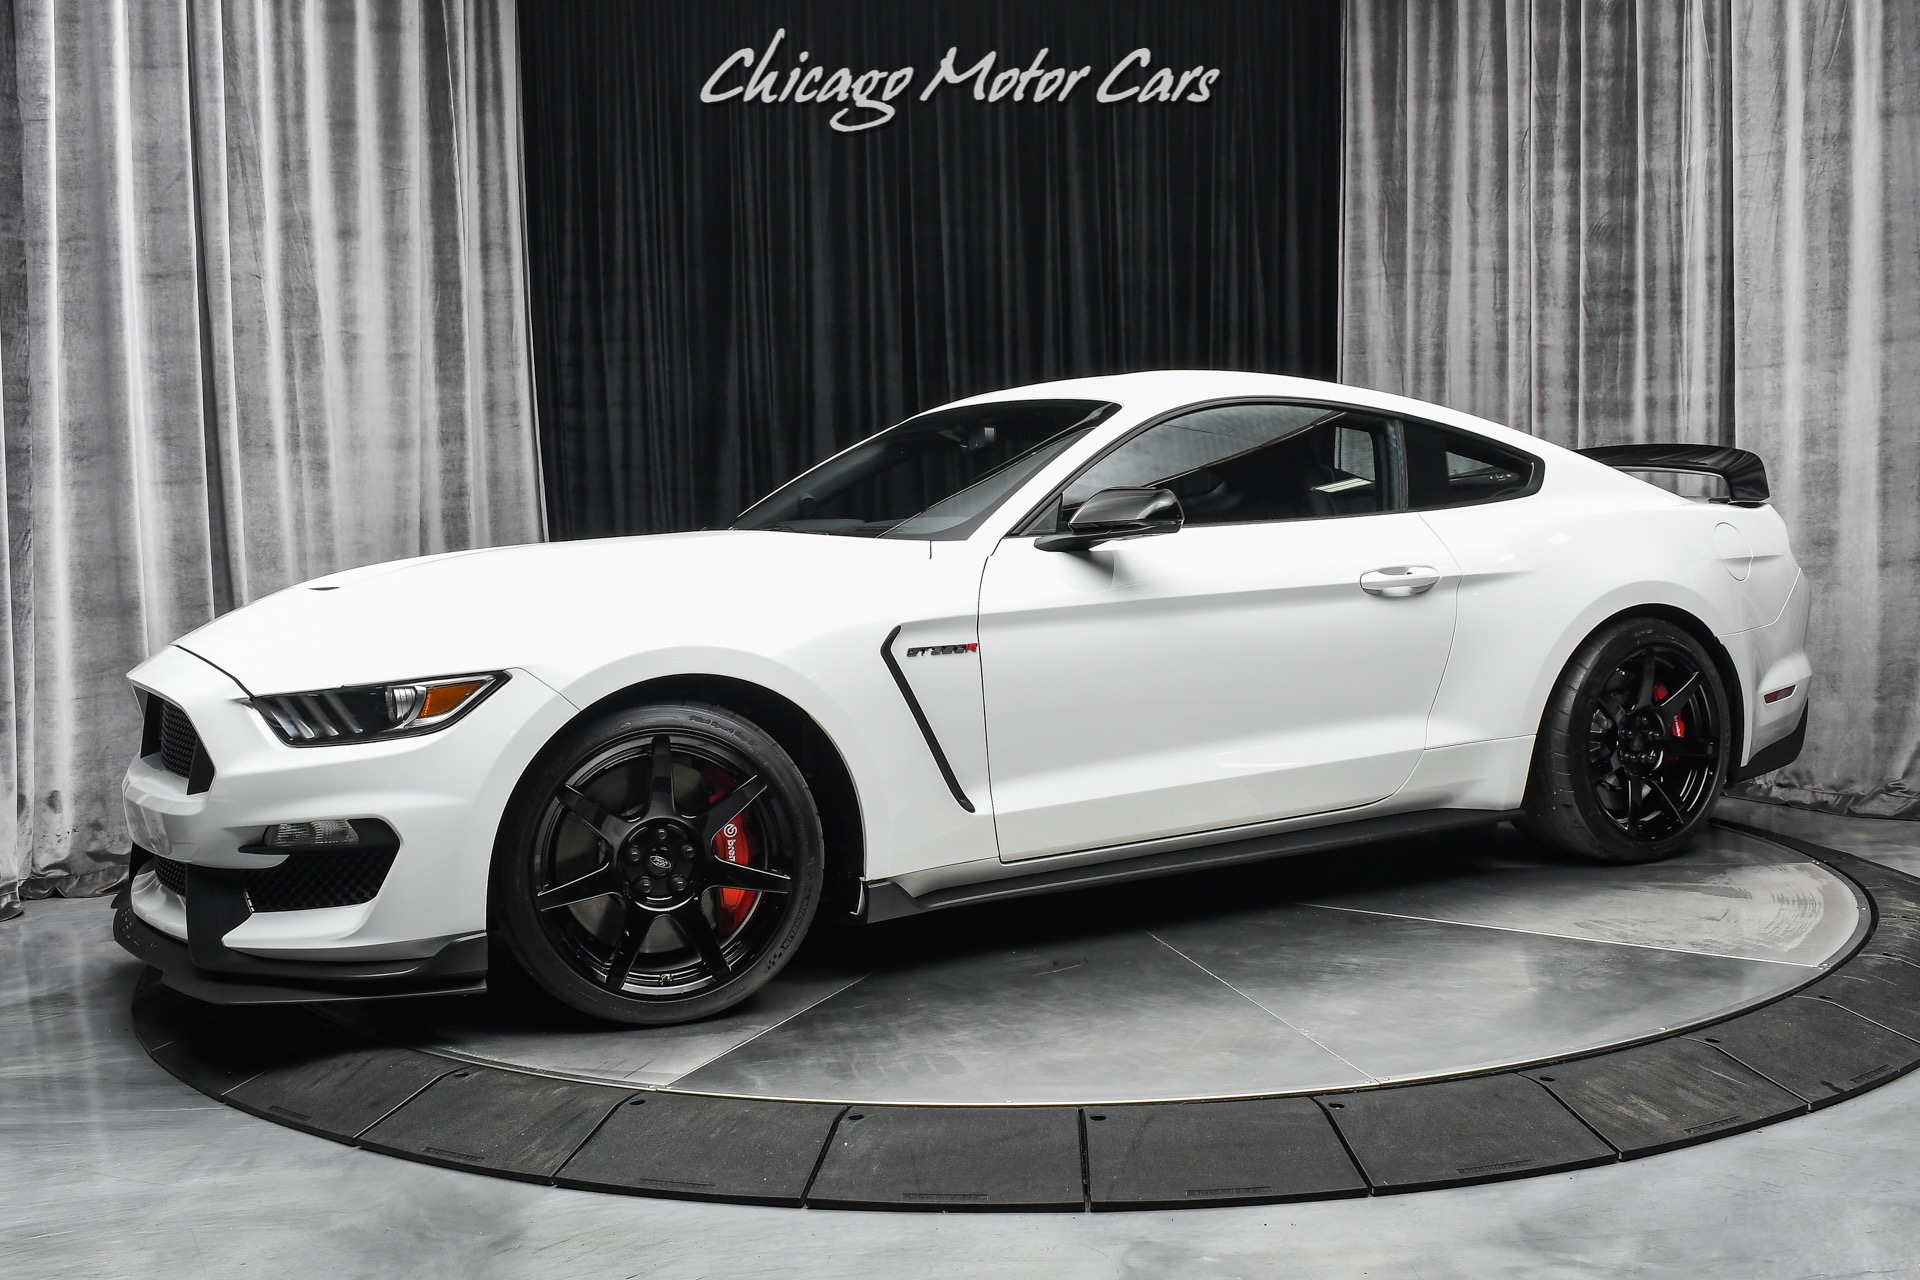 Used 2019 Ford Mustang Shelby GT350R-ONLY 1K MILES!-COMPLETELY STOCK!  STUNNING! For Sale (Special Pricing) | Chicago Motor Cars Stock #17718